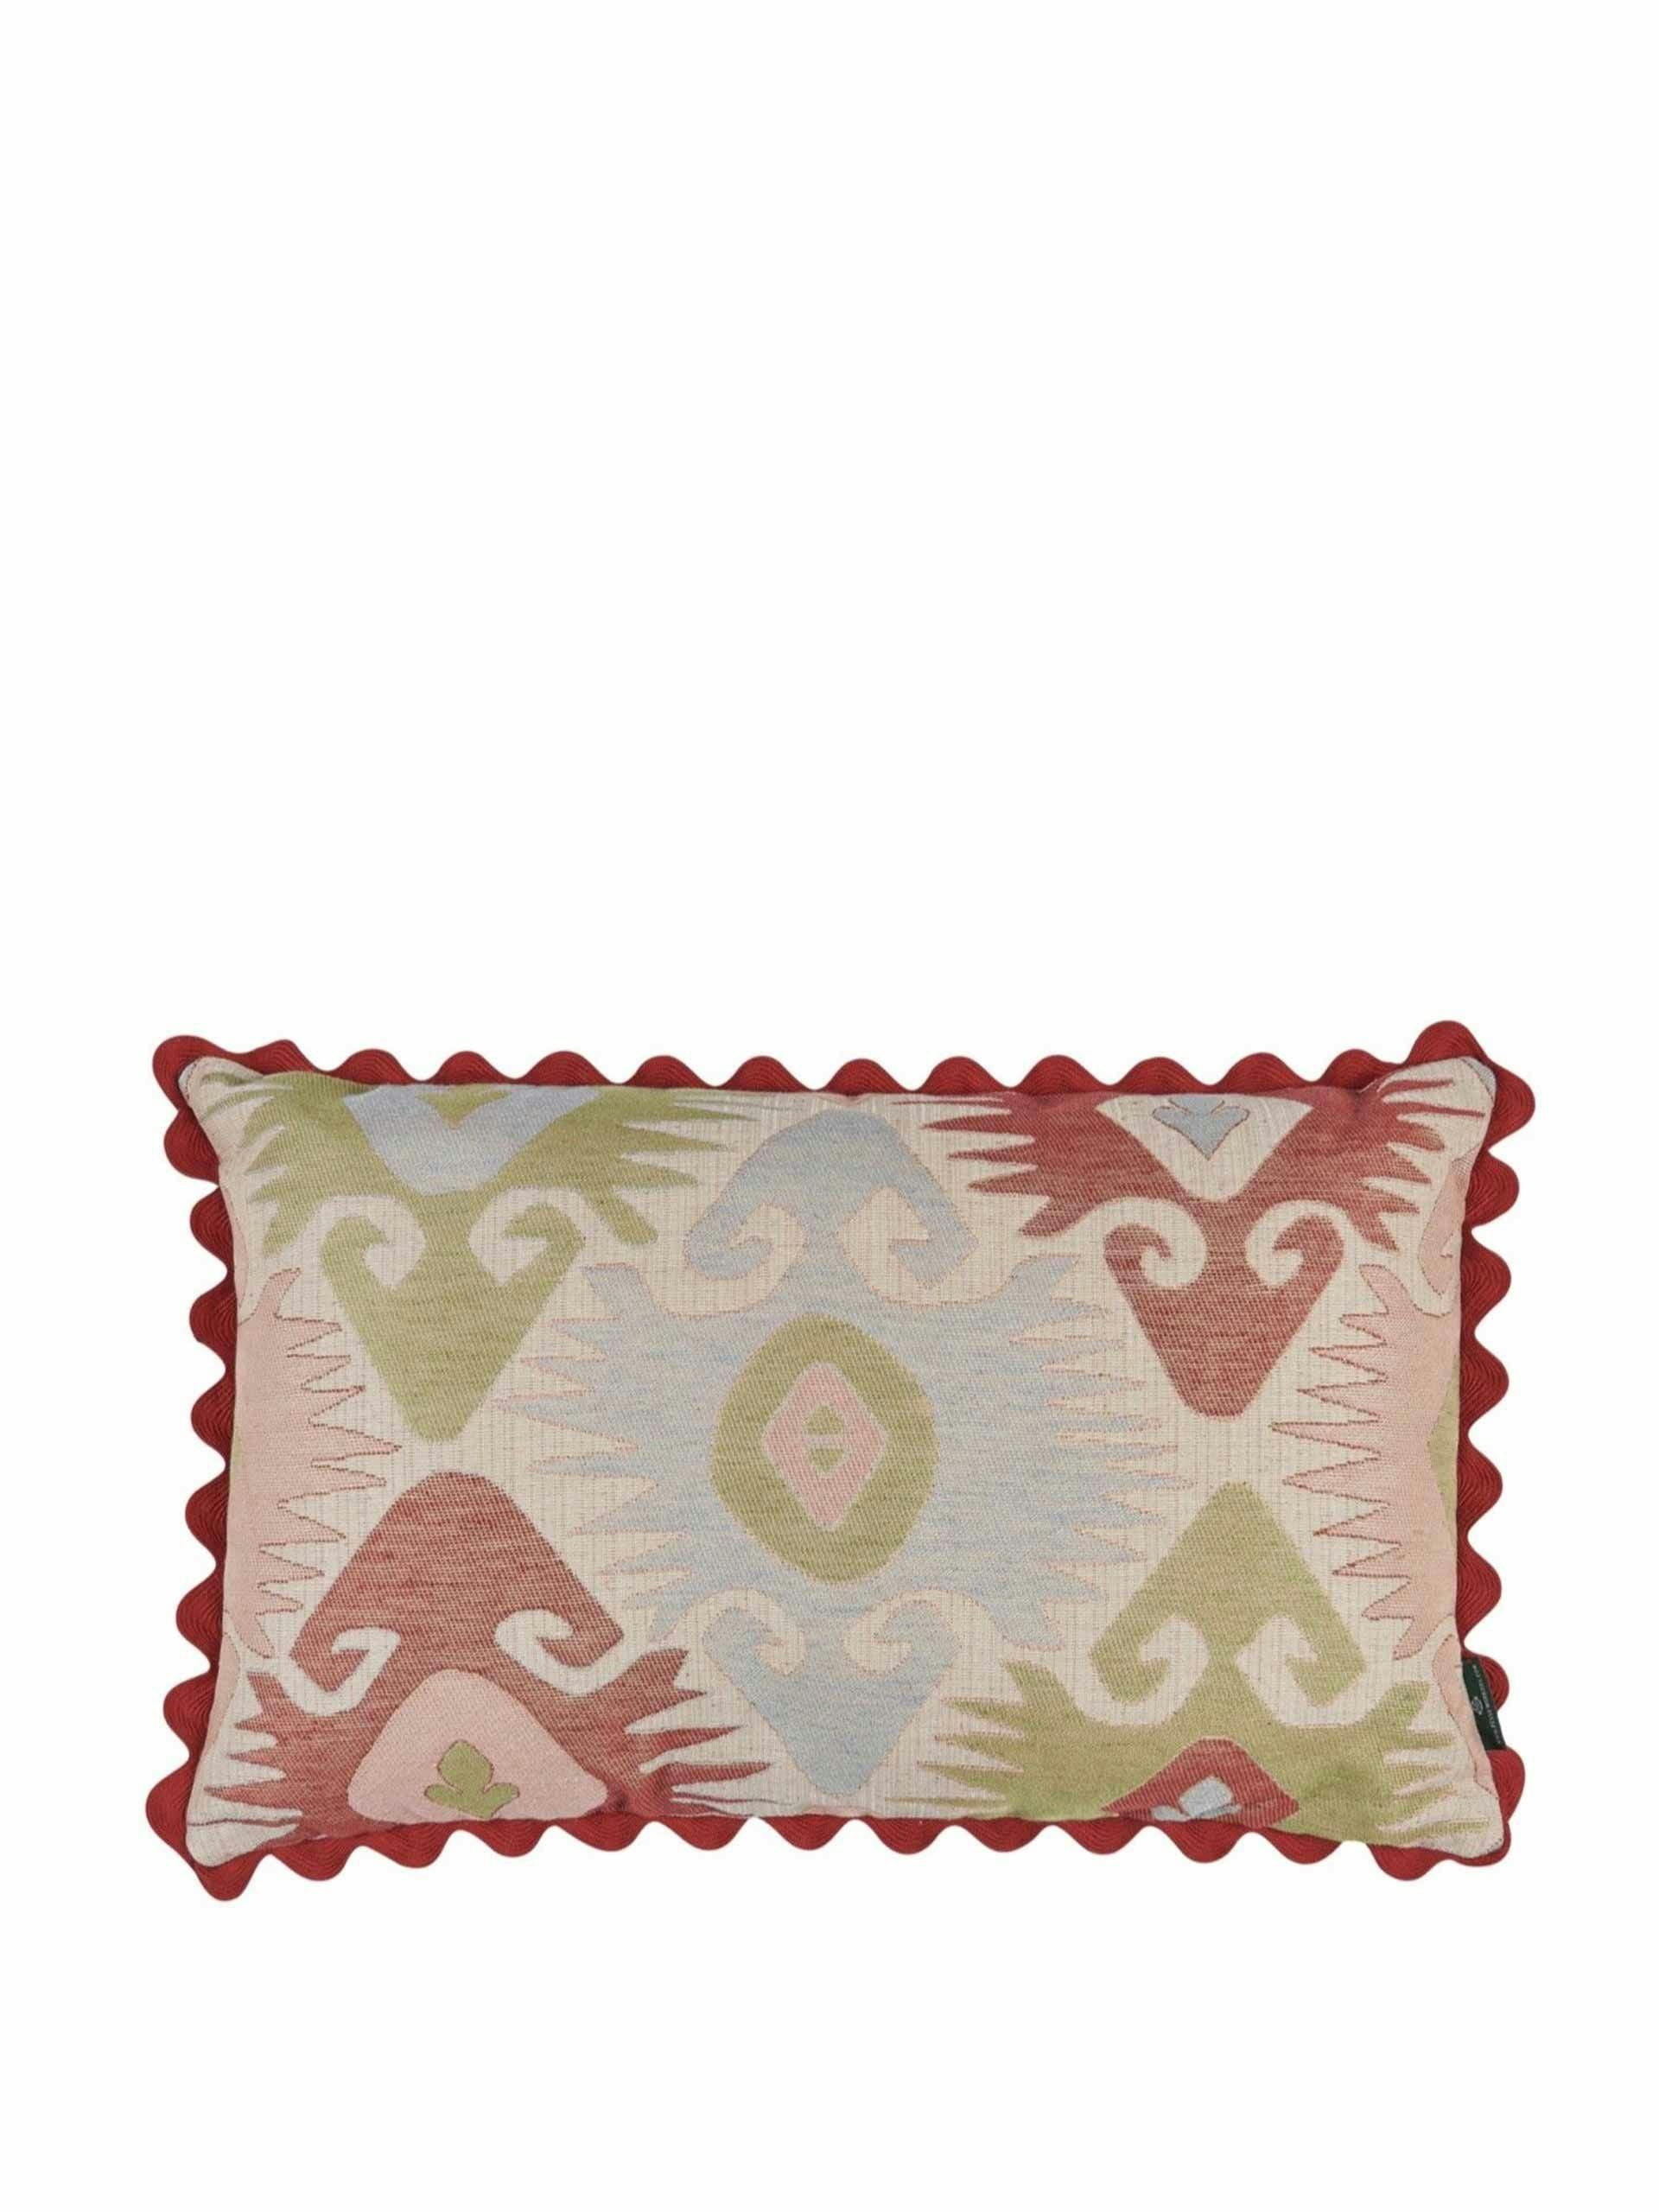 Limited edition patterned cushion with red wavy trim